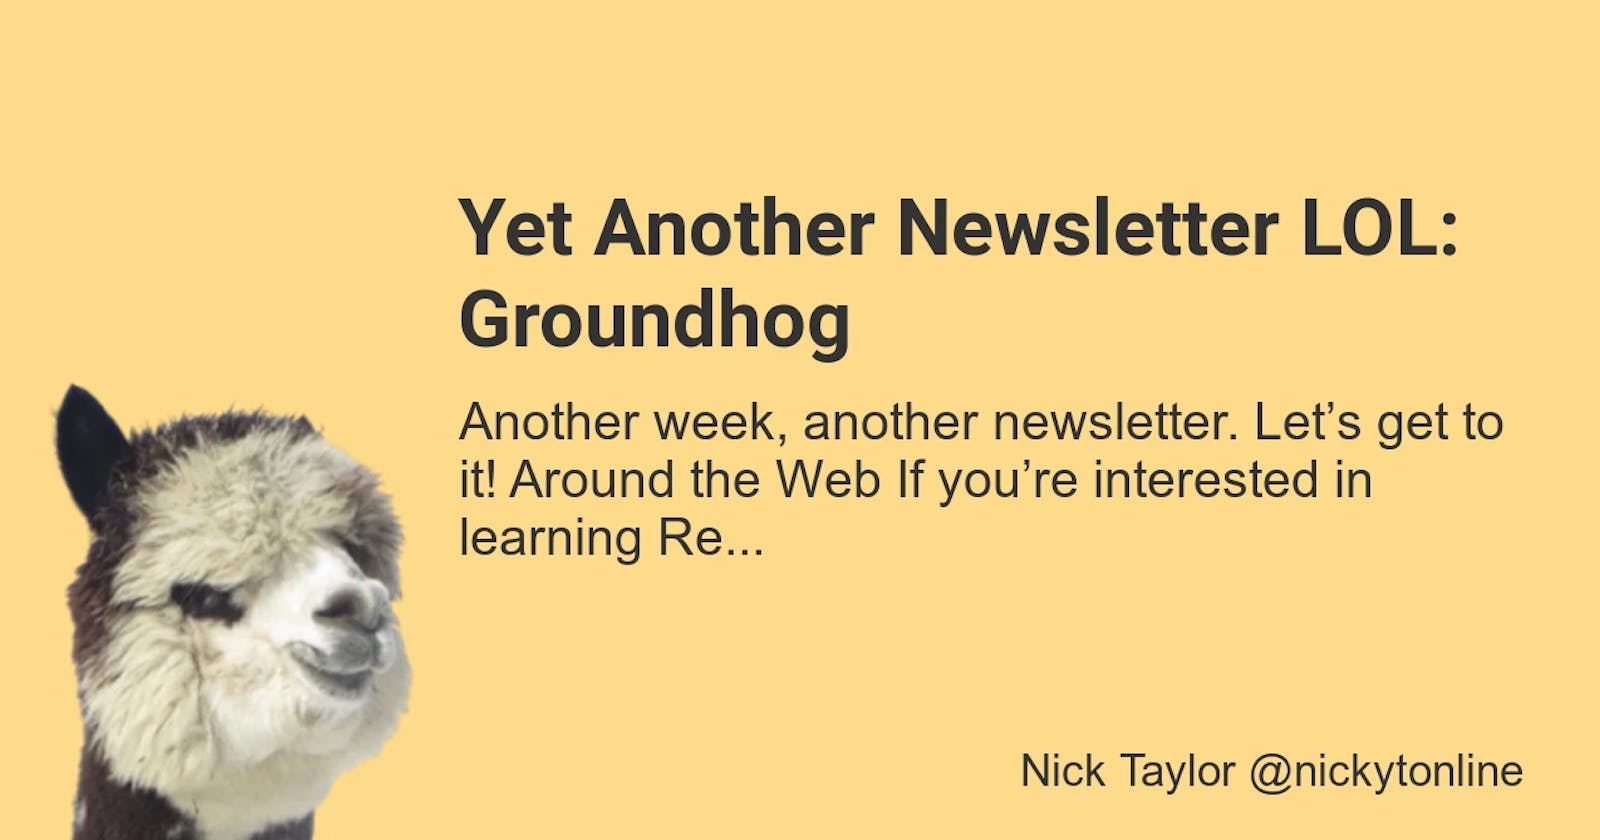 Yet Another Newsletter LOL: Groundhog